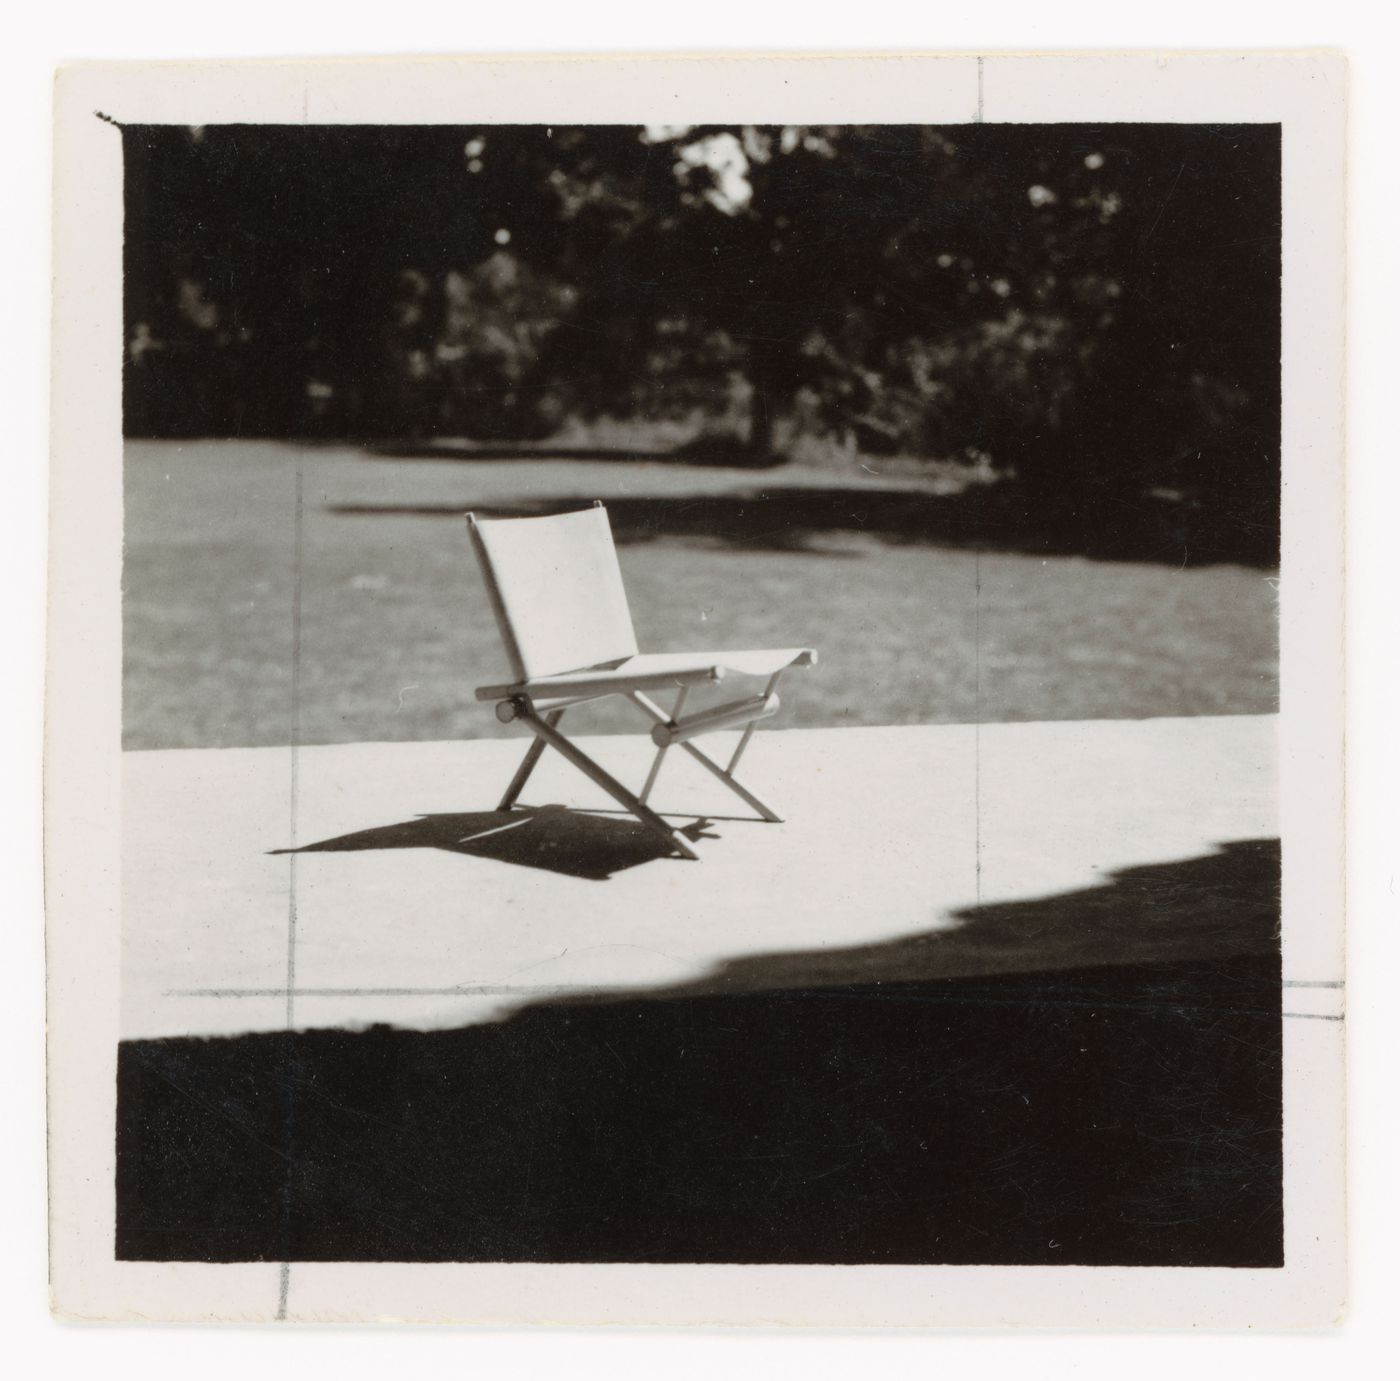 View of a chair possibly designed by Pierre Jeanneret, Chandigarh, India